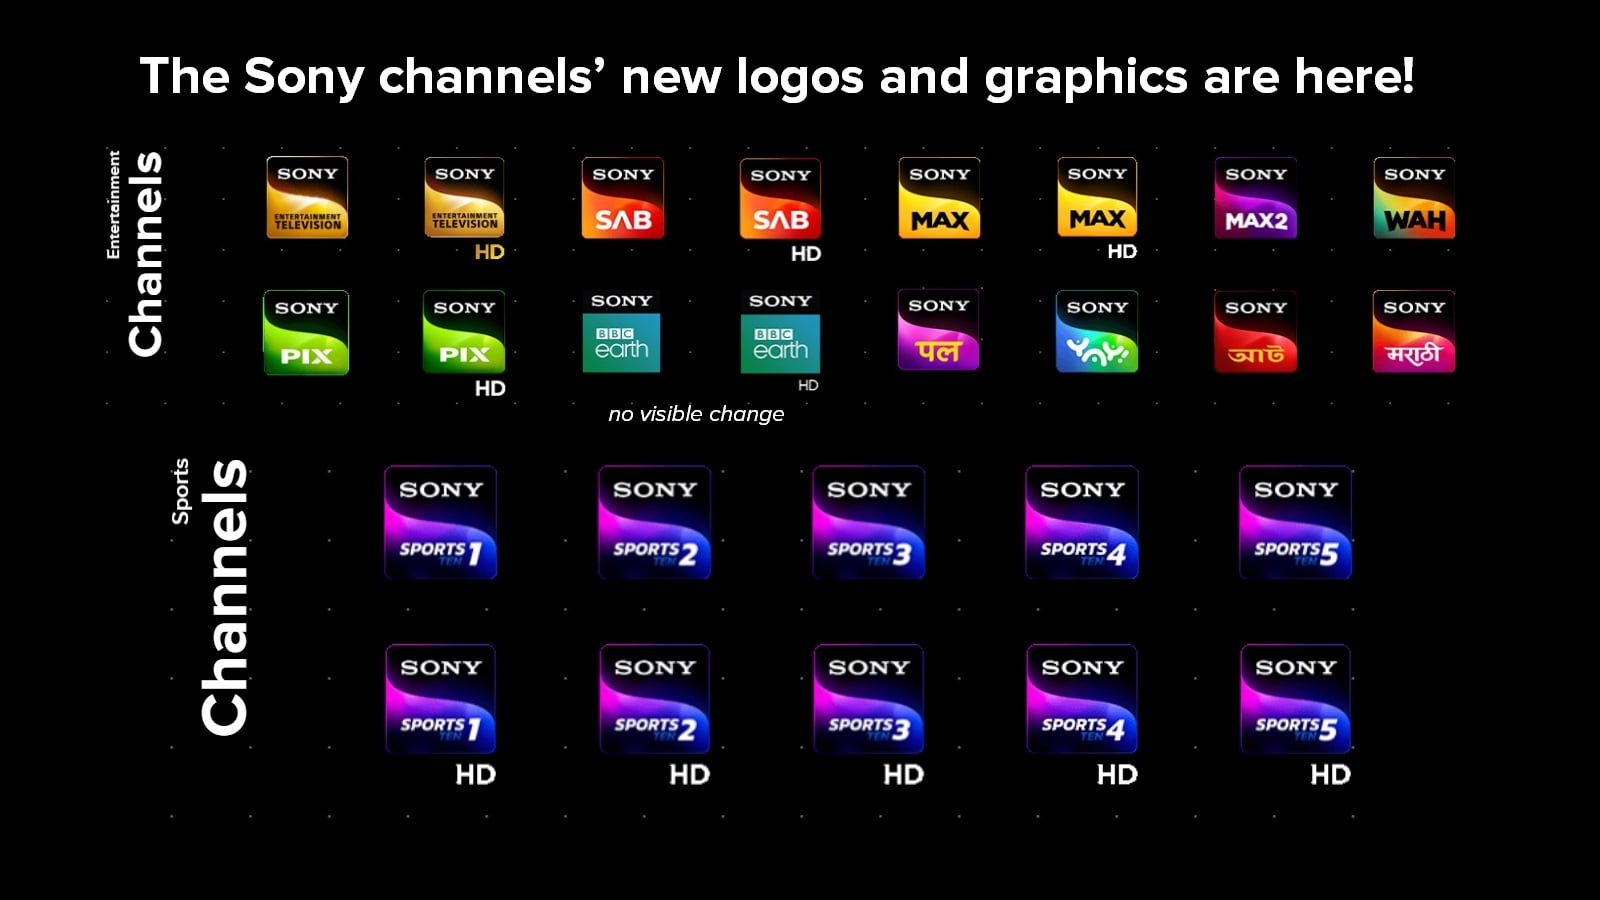 Sony Pictures Network channels get rebranded with new logos and graphics